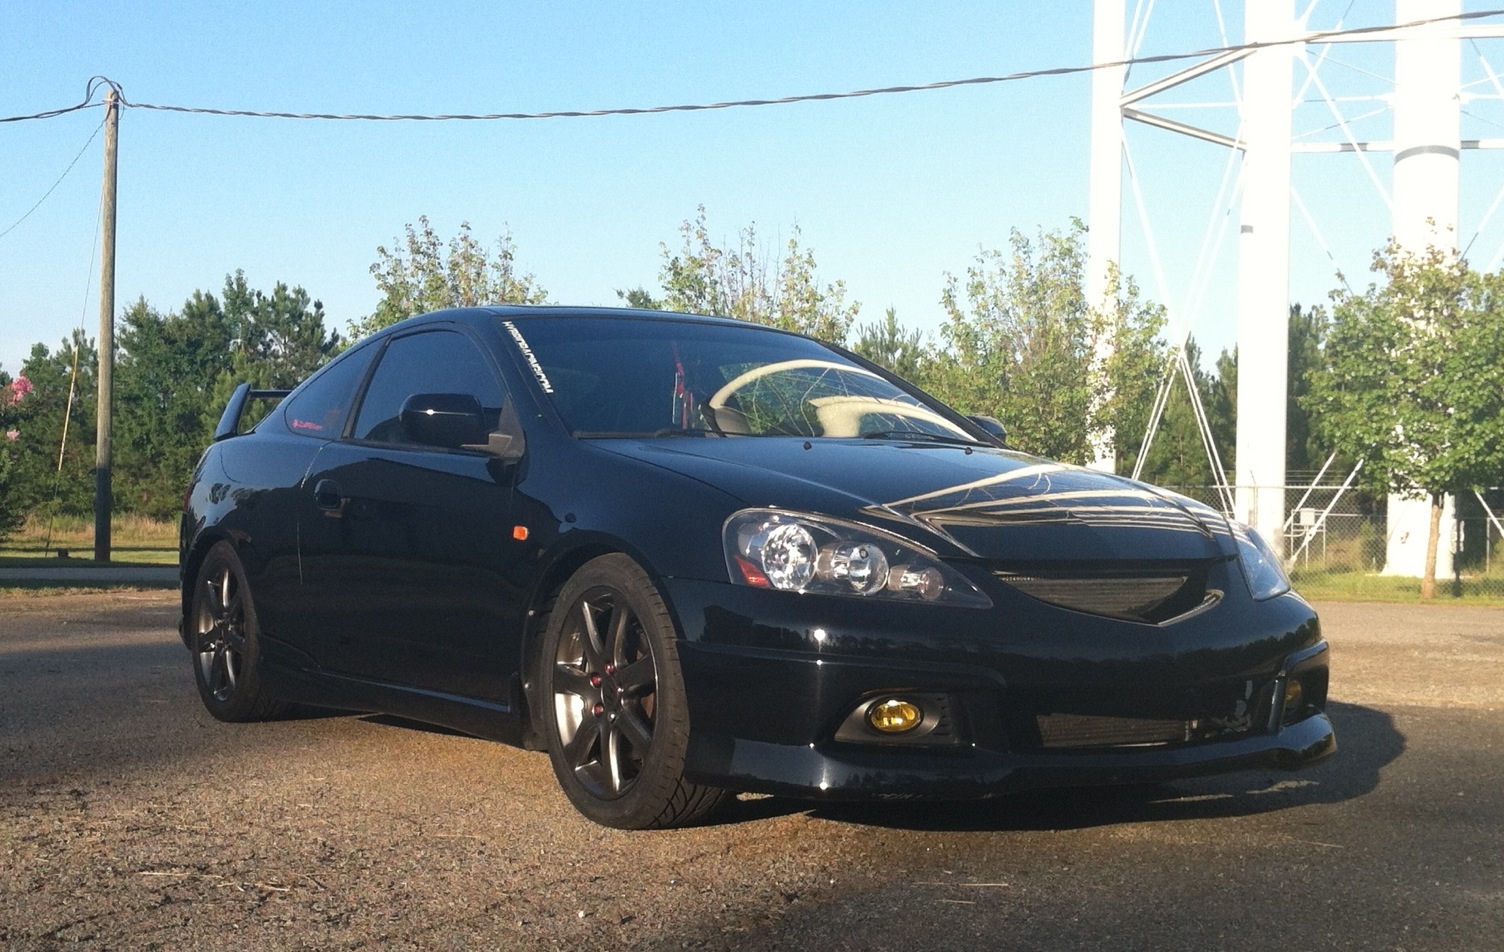 04 Type-s with full 05-06 conversion on 05 TSX wheels.